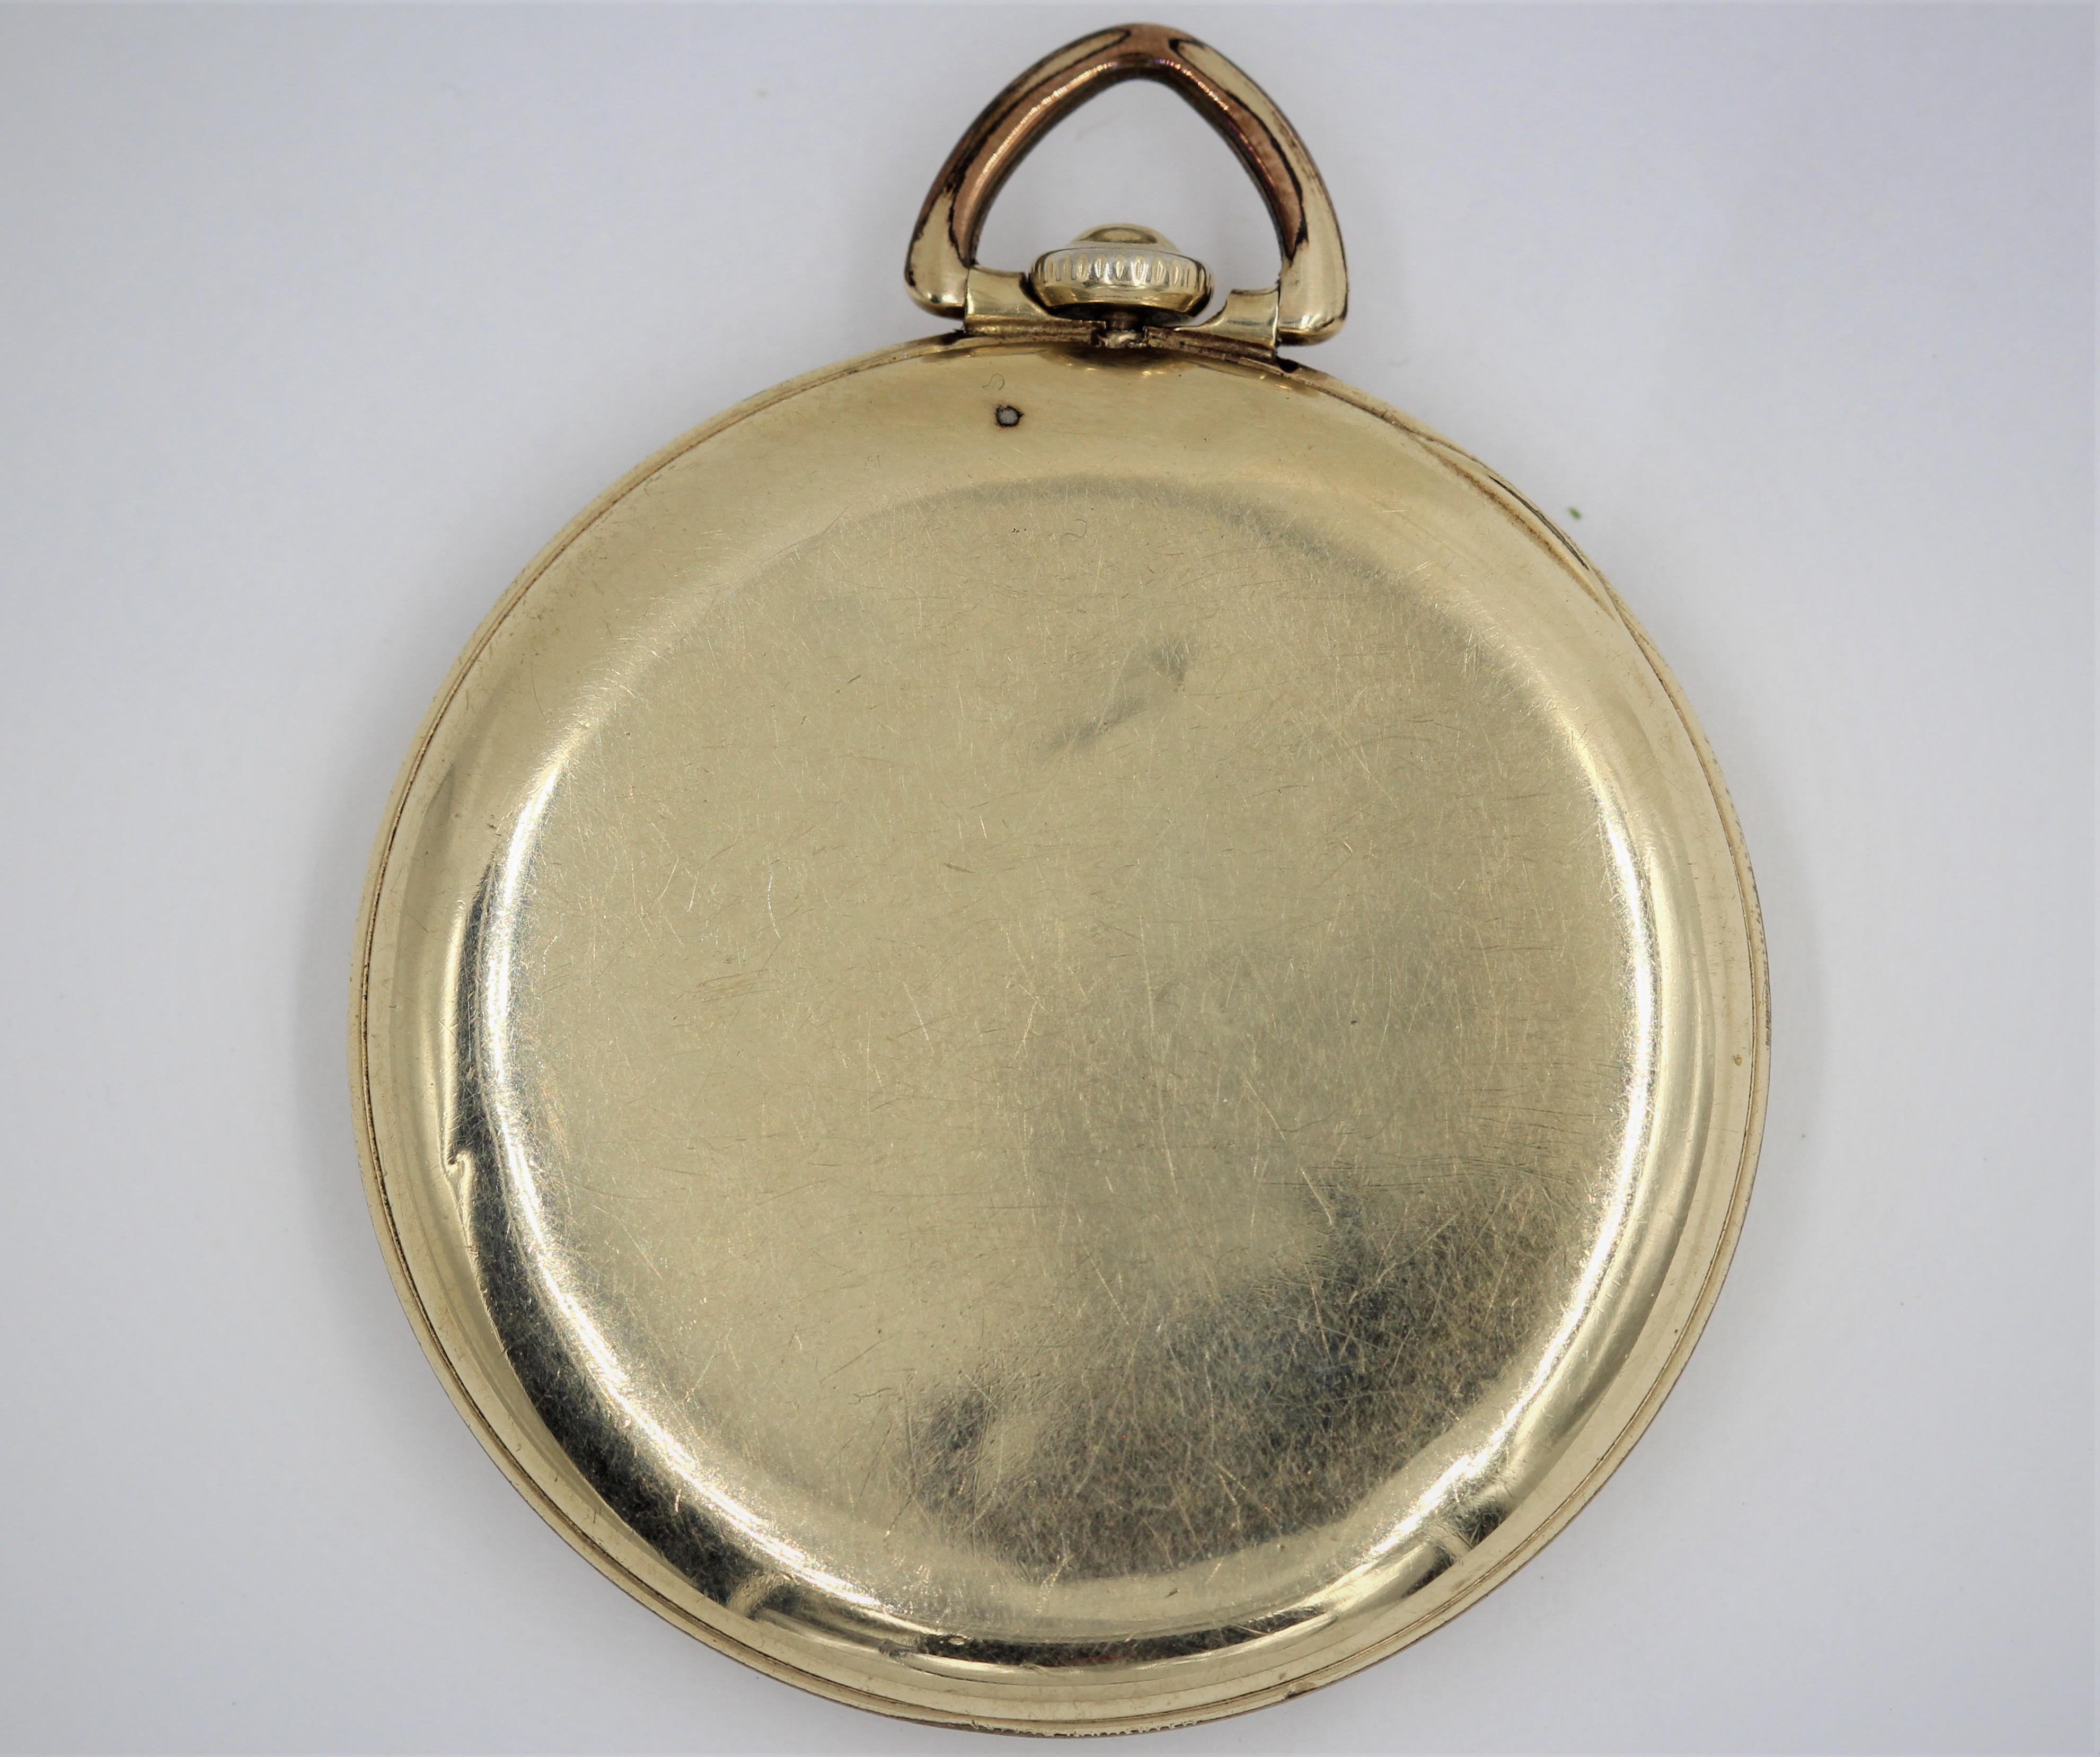 14k yellow gold tavannes pocket watch.
17 jewels patented.
Movement serial #41246.
